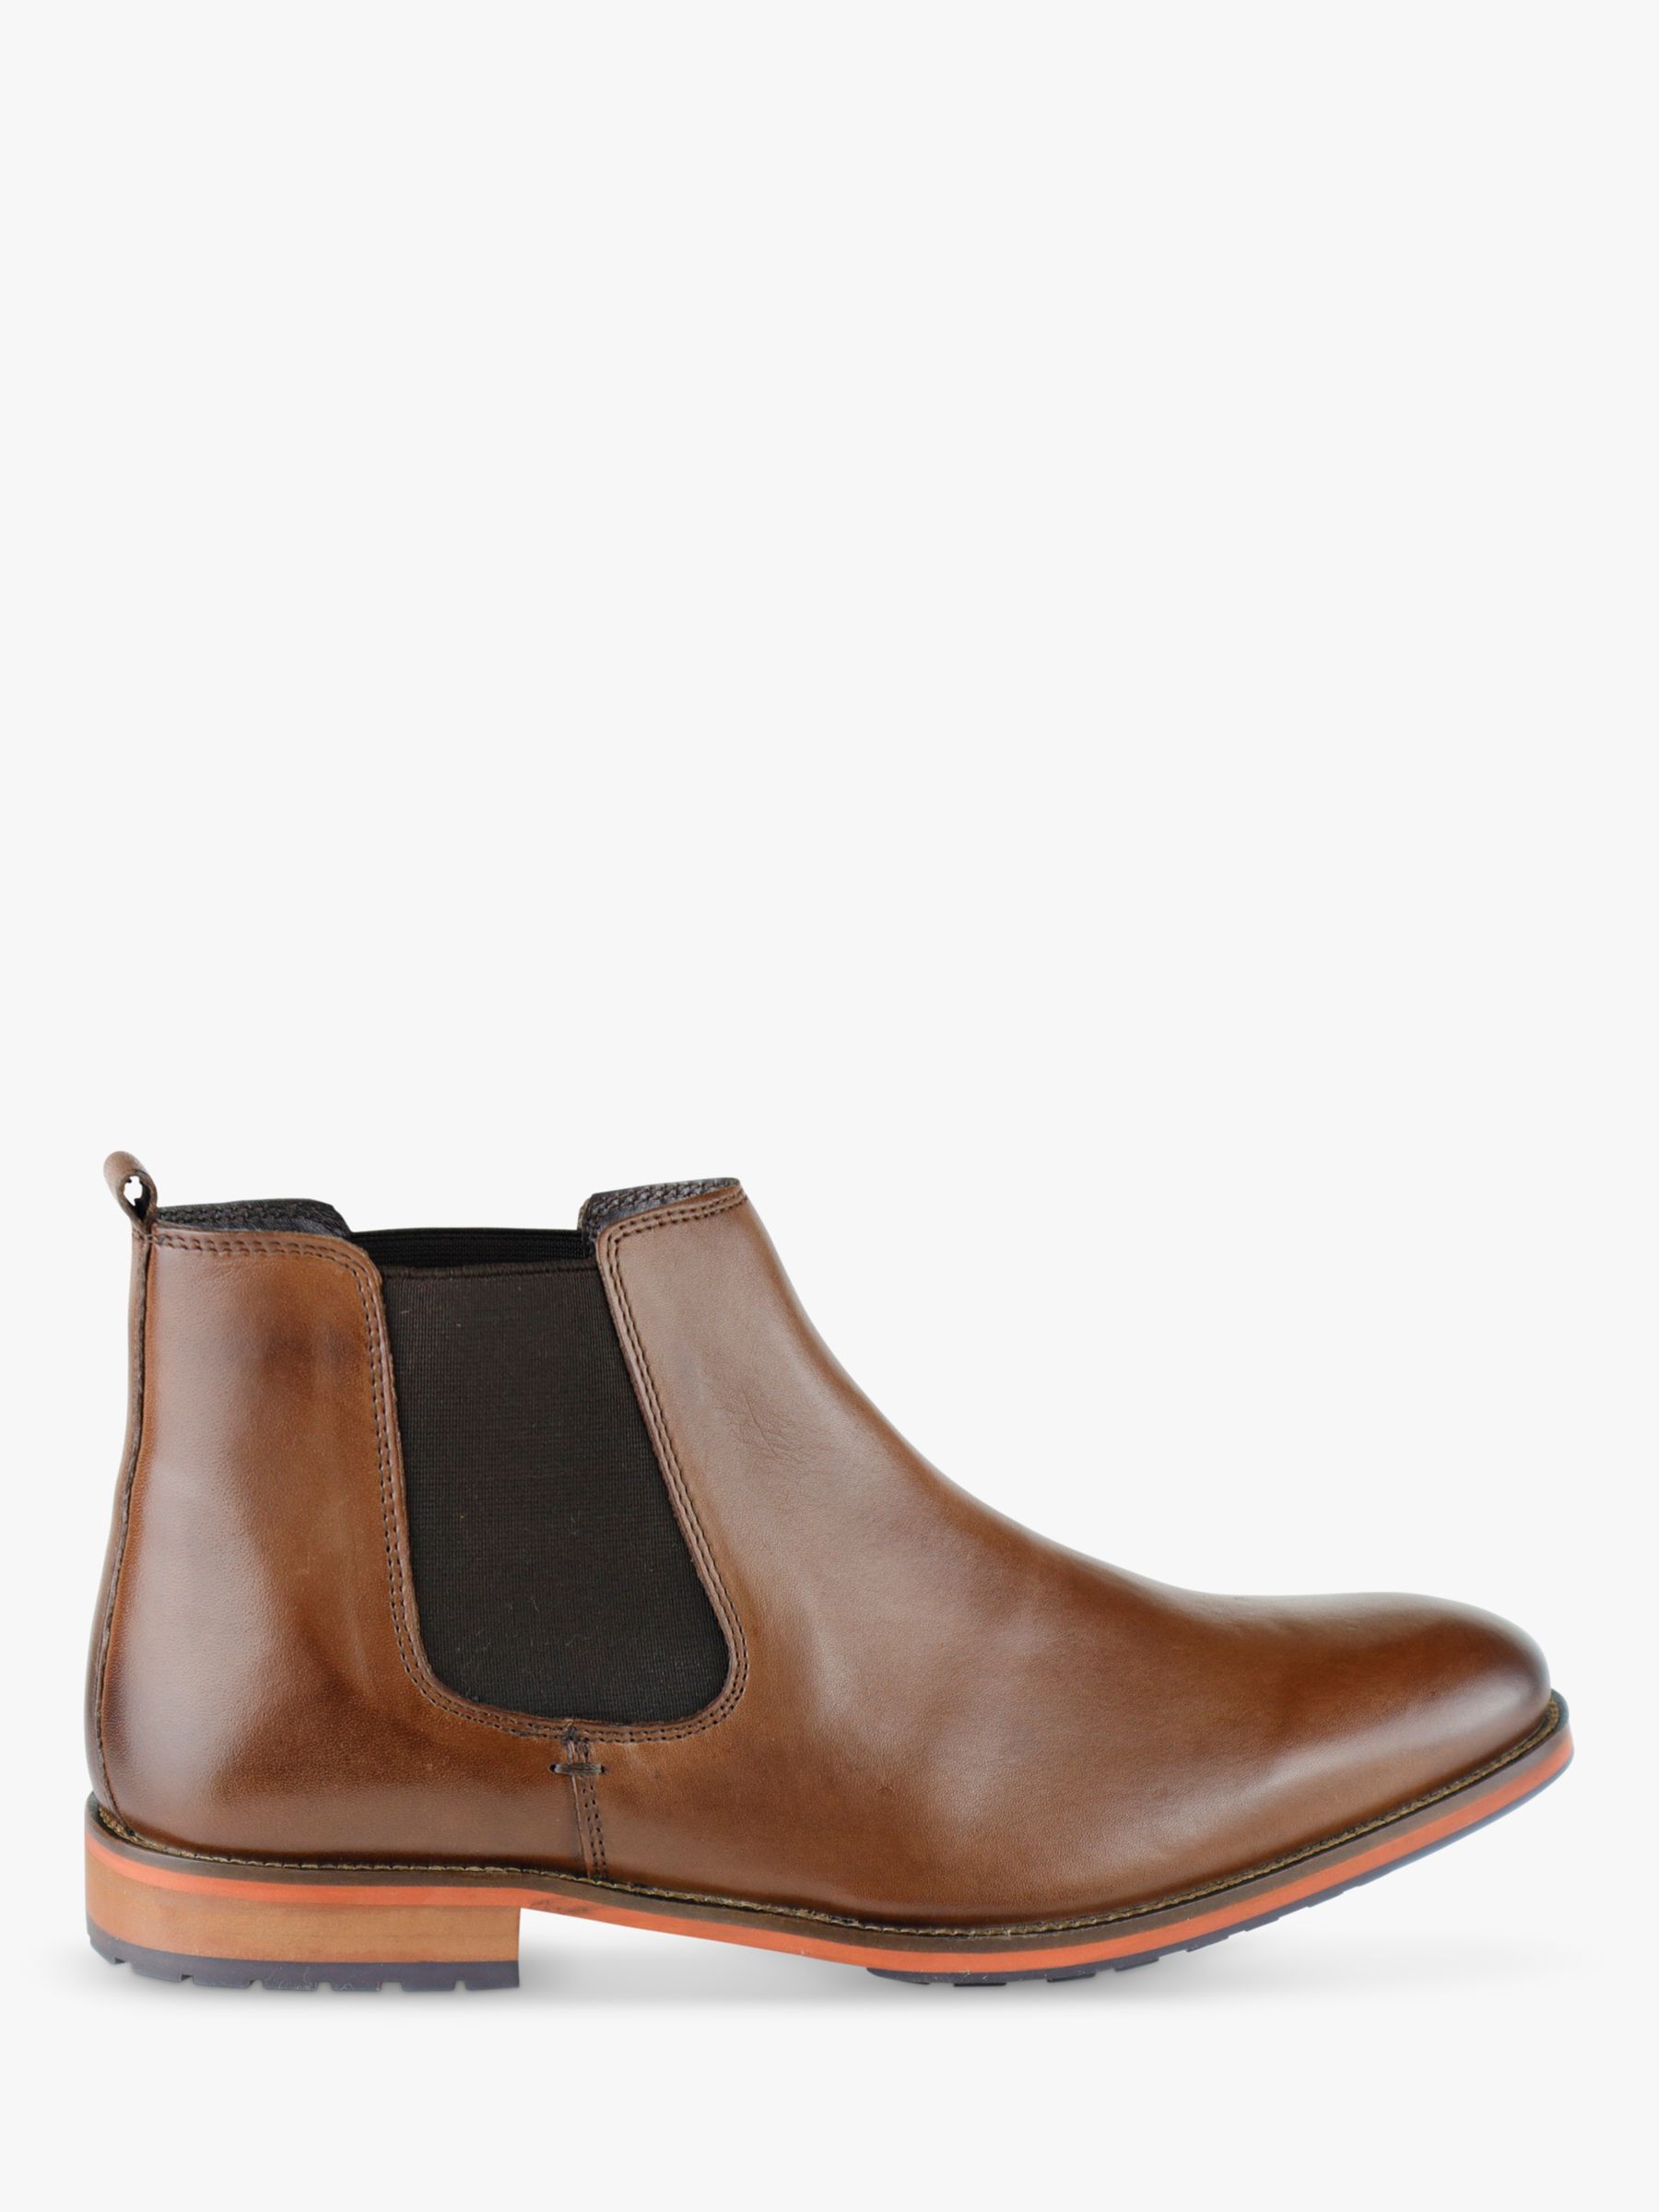 Silver Street London Argyll Leather Chelsea Boots, Brown